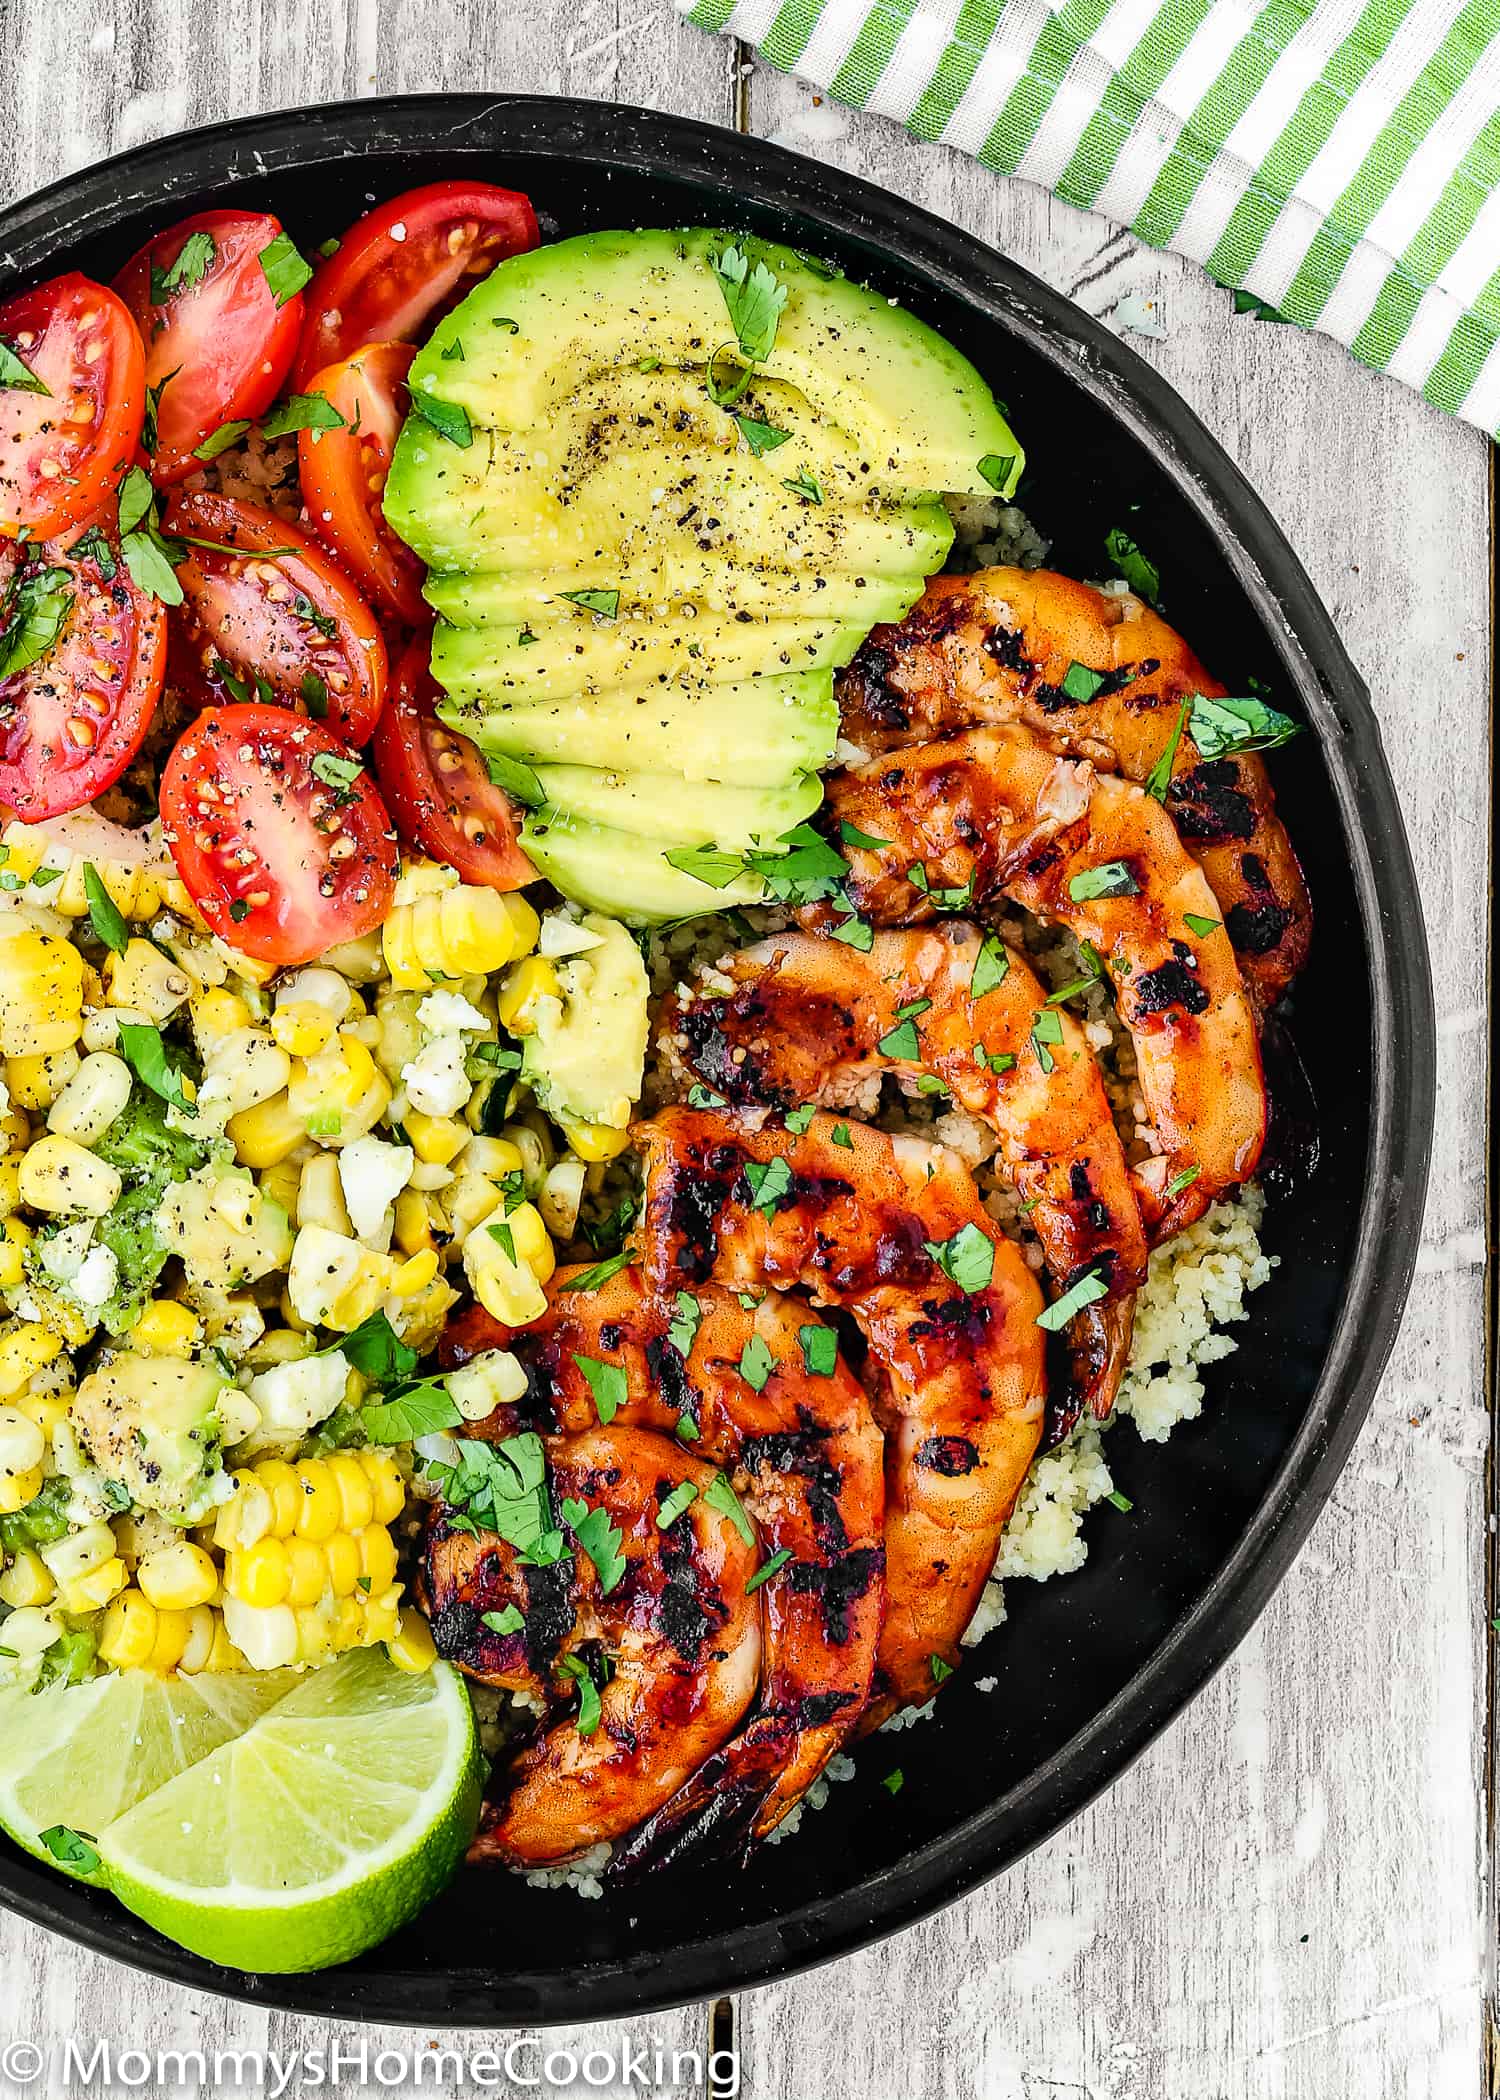 This Grilled Barbecue Shrimp and Corn Avocado Salad Bowls recipe is delicious, incredibly tasty and ridiculously easy to make! Perfectly tender and juicy jumbo shrimp glazed with barbecue sauce, couscous, corn avocado salad, tomatoes, make a perfect summer meal, don't you think? https://mommyshomecooking.com